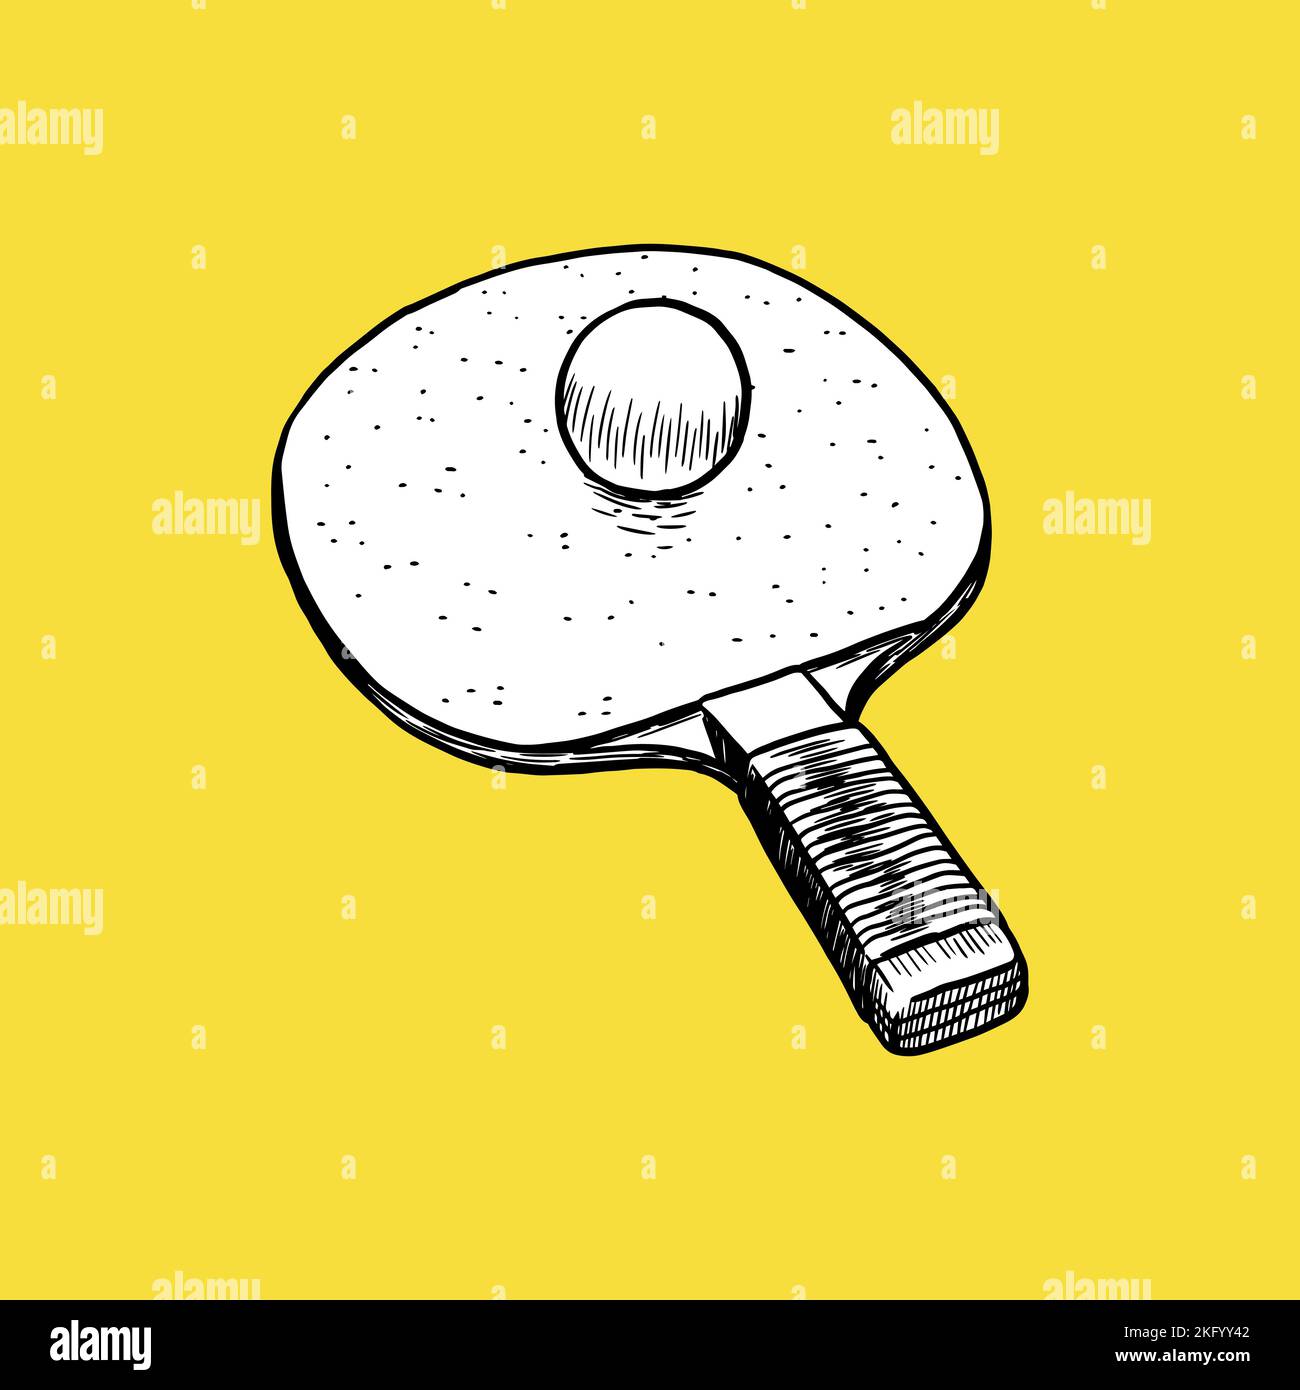 How to Make a Table Tennis Vector Illustration  Envato Tuts